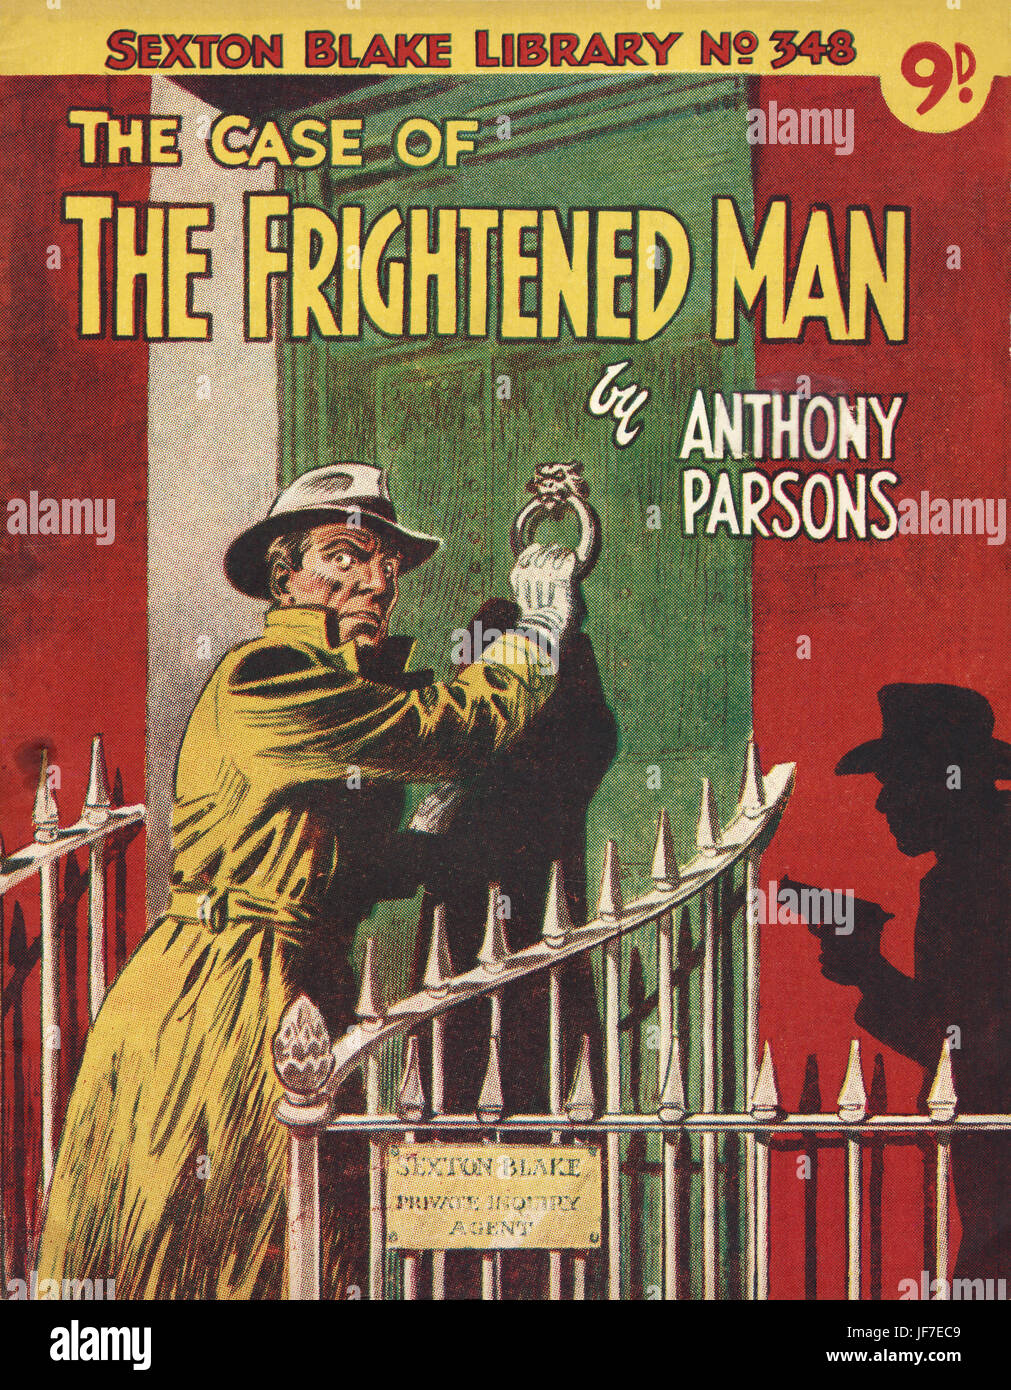 'The Case of the Frightened Man' by Anthony Parsons -book  cover illustration. Frightened man knocks on   door, while shadow  man with gun looms ominously.  From The Sexton Blake Library. C. 1950s.  Published by Amalgamated Press, London. Stock Photo